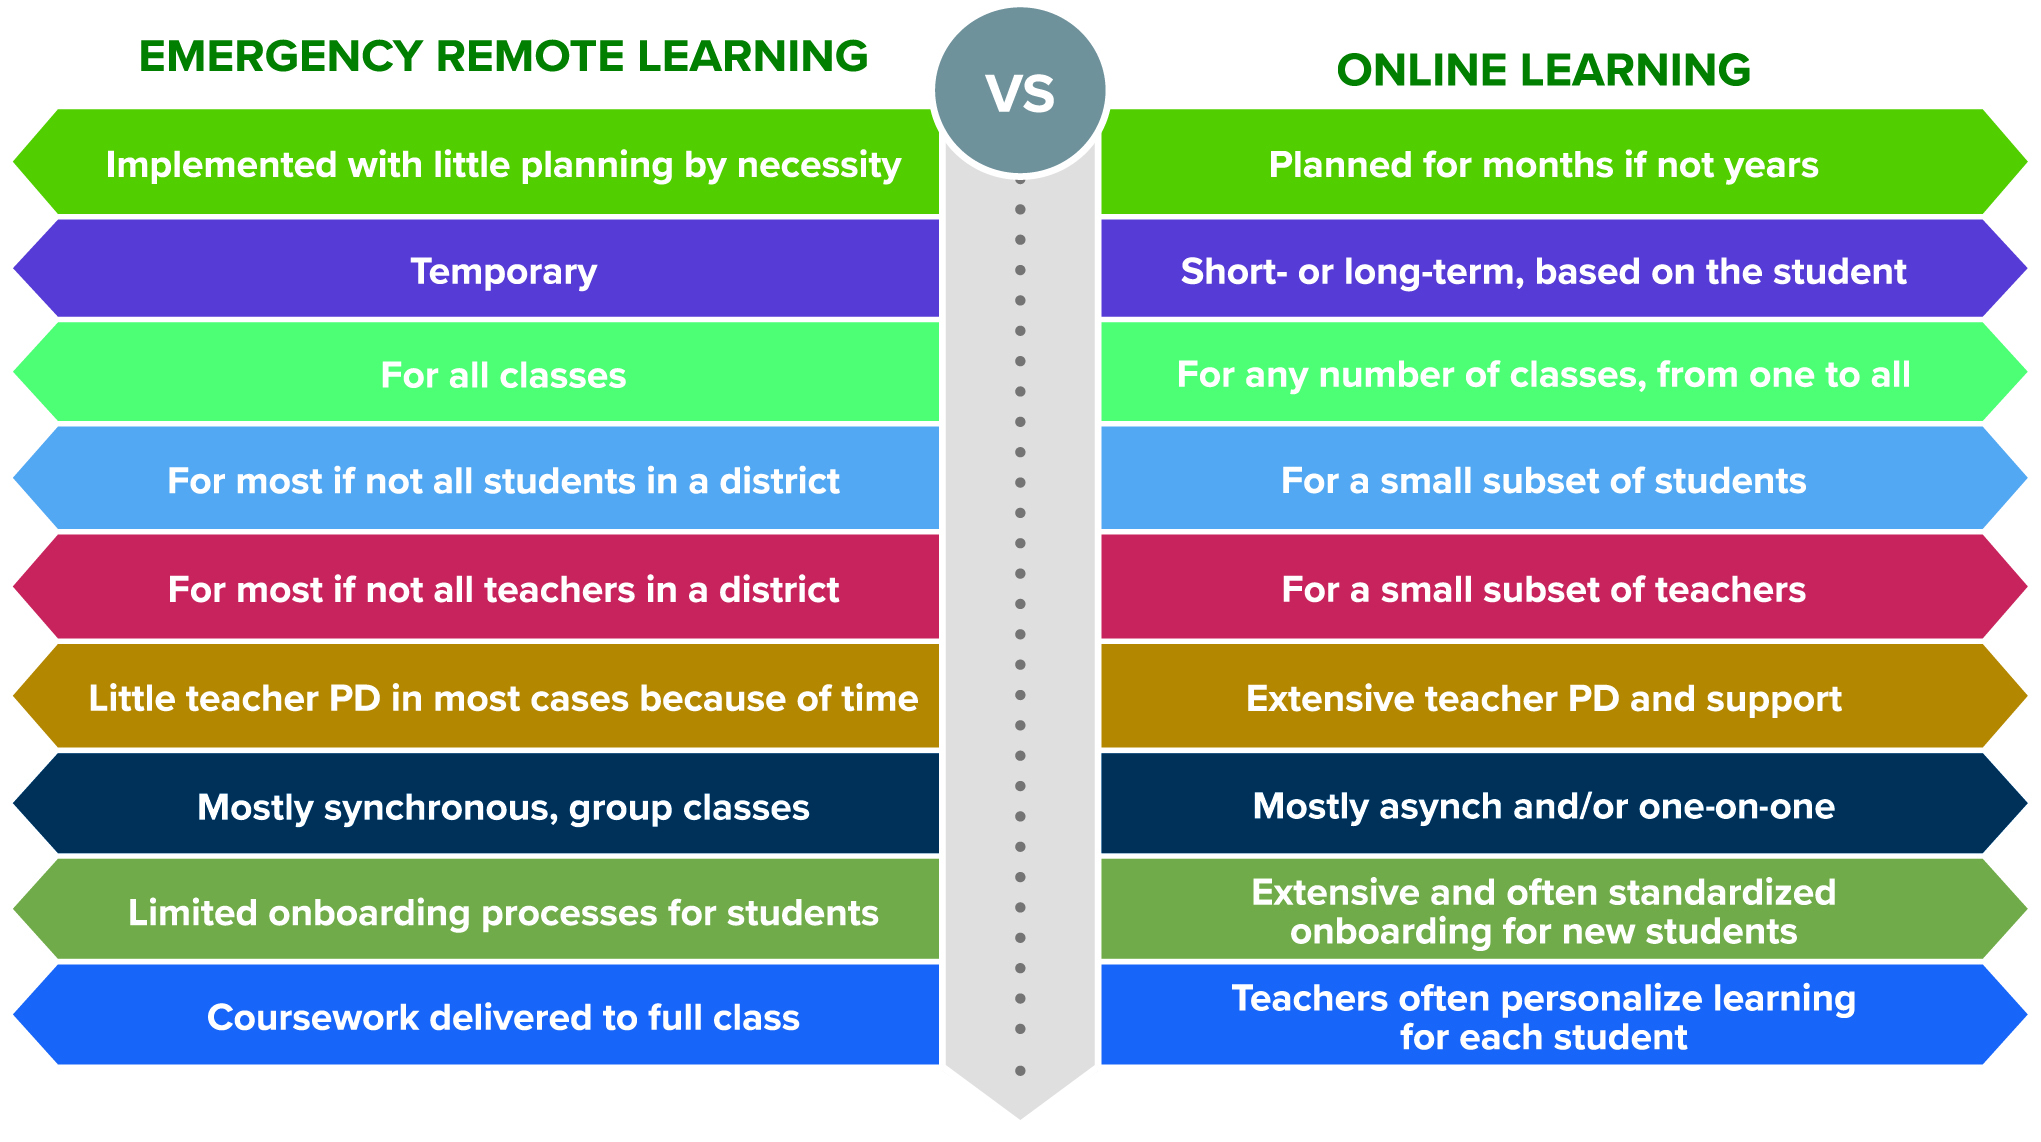 A chart showing the differences between emergency remote learning and online learning